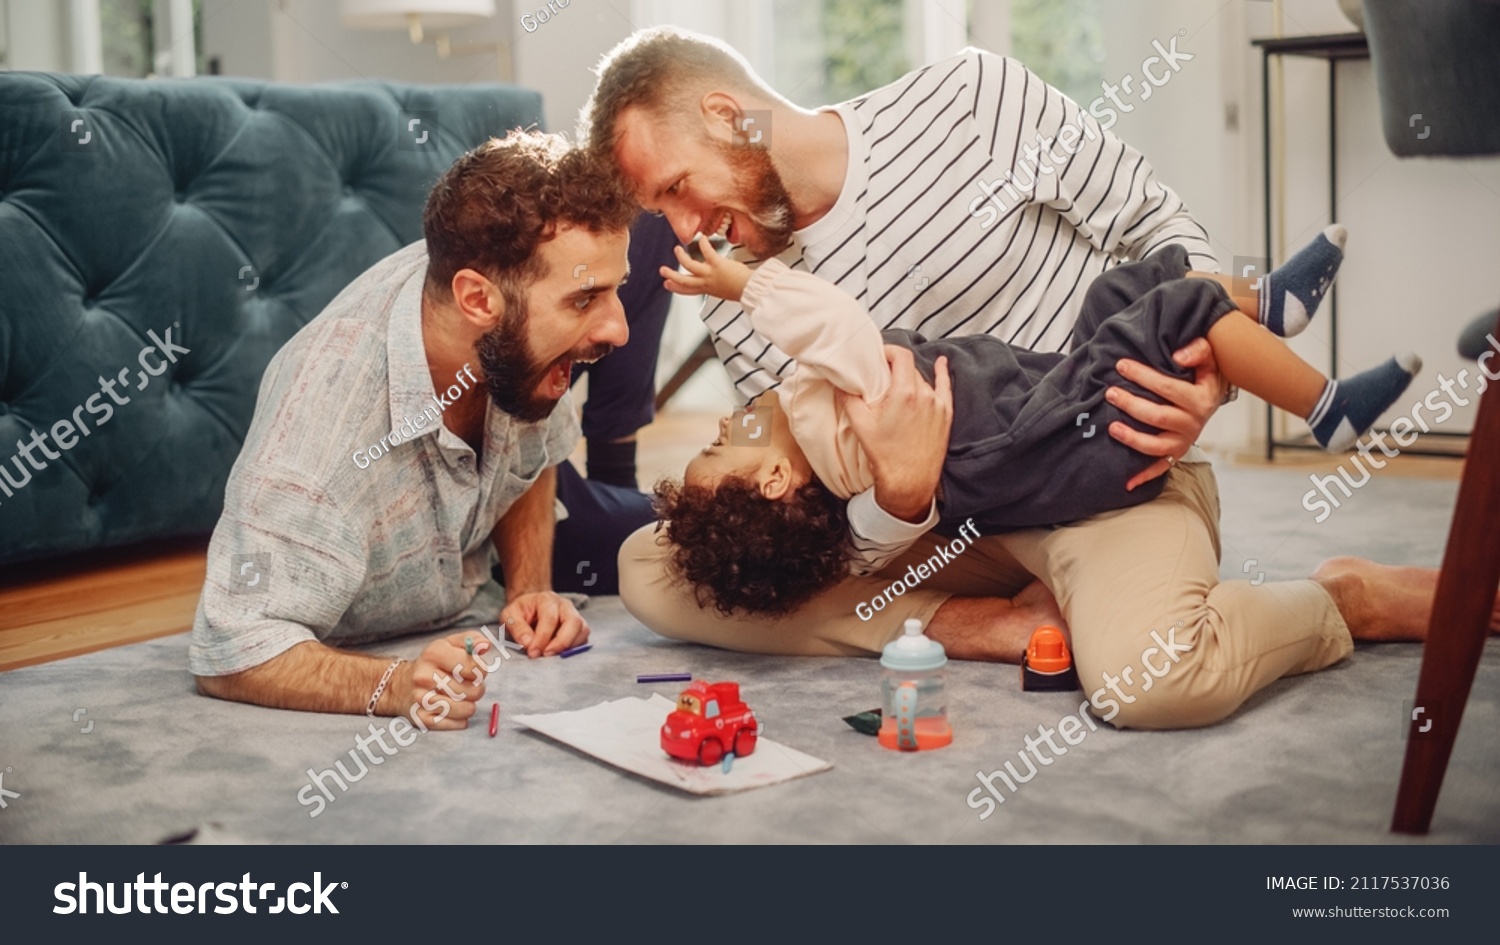 Loving LGBTQ Family Playing with Toys with Adorable Baby Boy at Home on Living Room Floor. Cheerful Gay Couple Nurturing a Child. Concept of Diverse Childhood, New Life, Parenthood. #2117537036